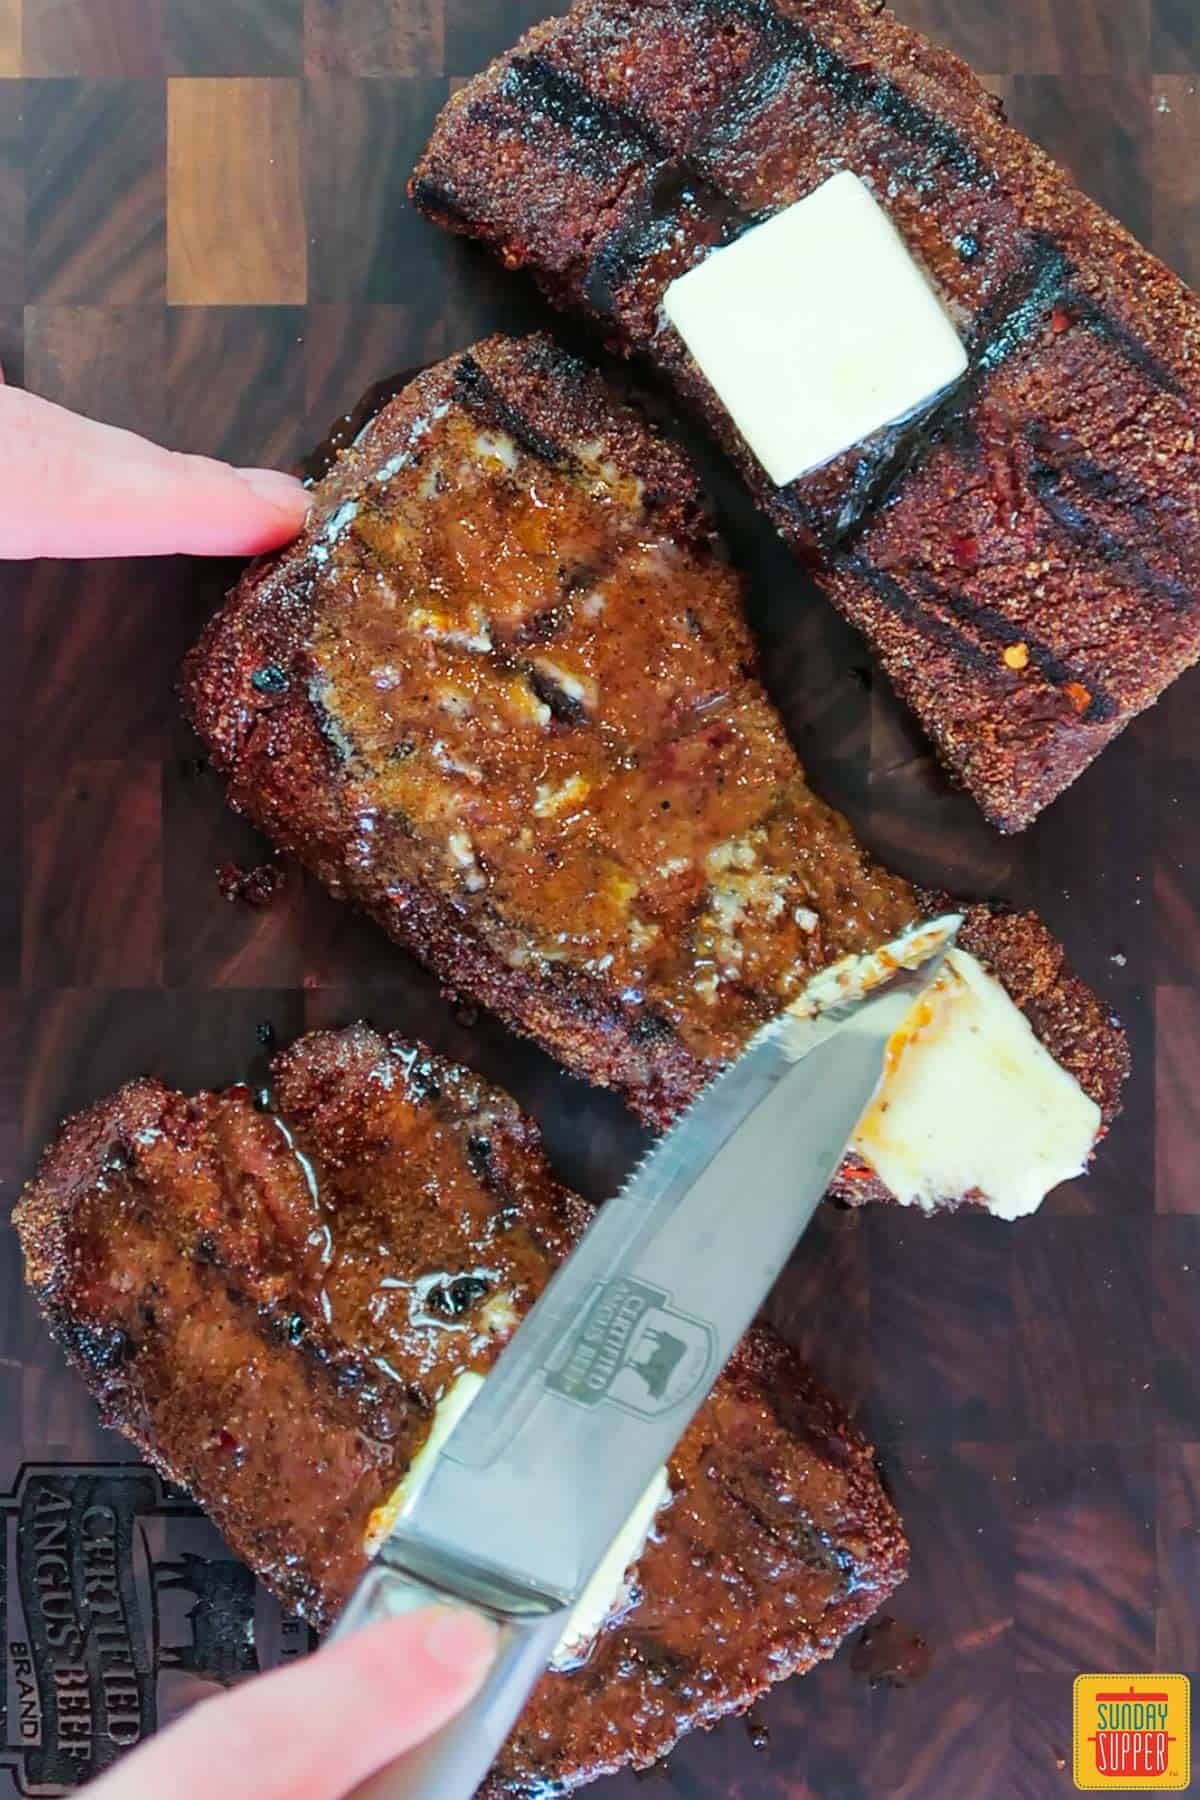 Spreading a pat of butter onto the cooked short ribs